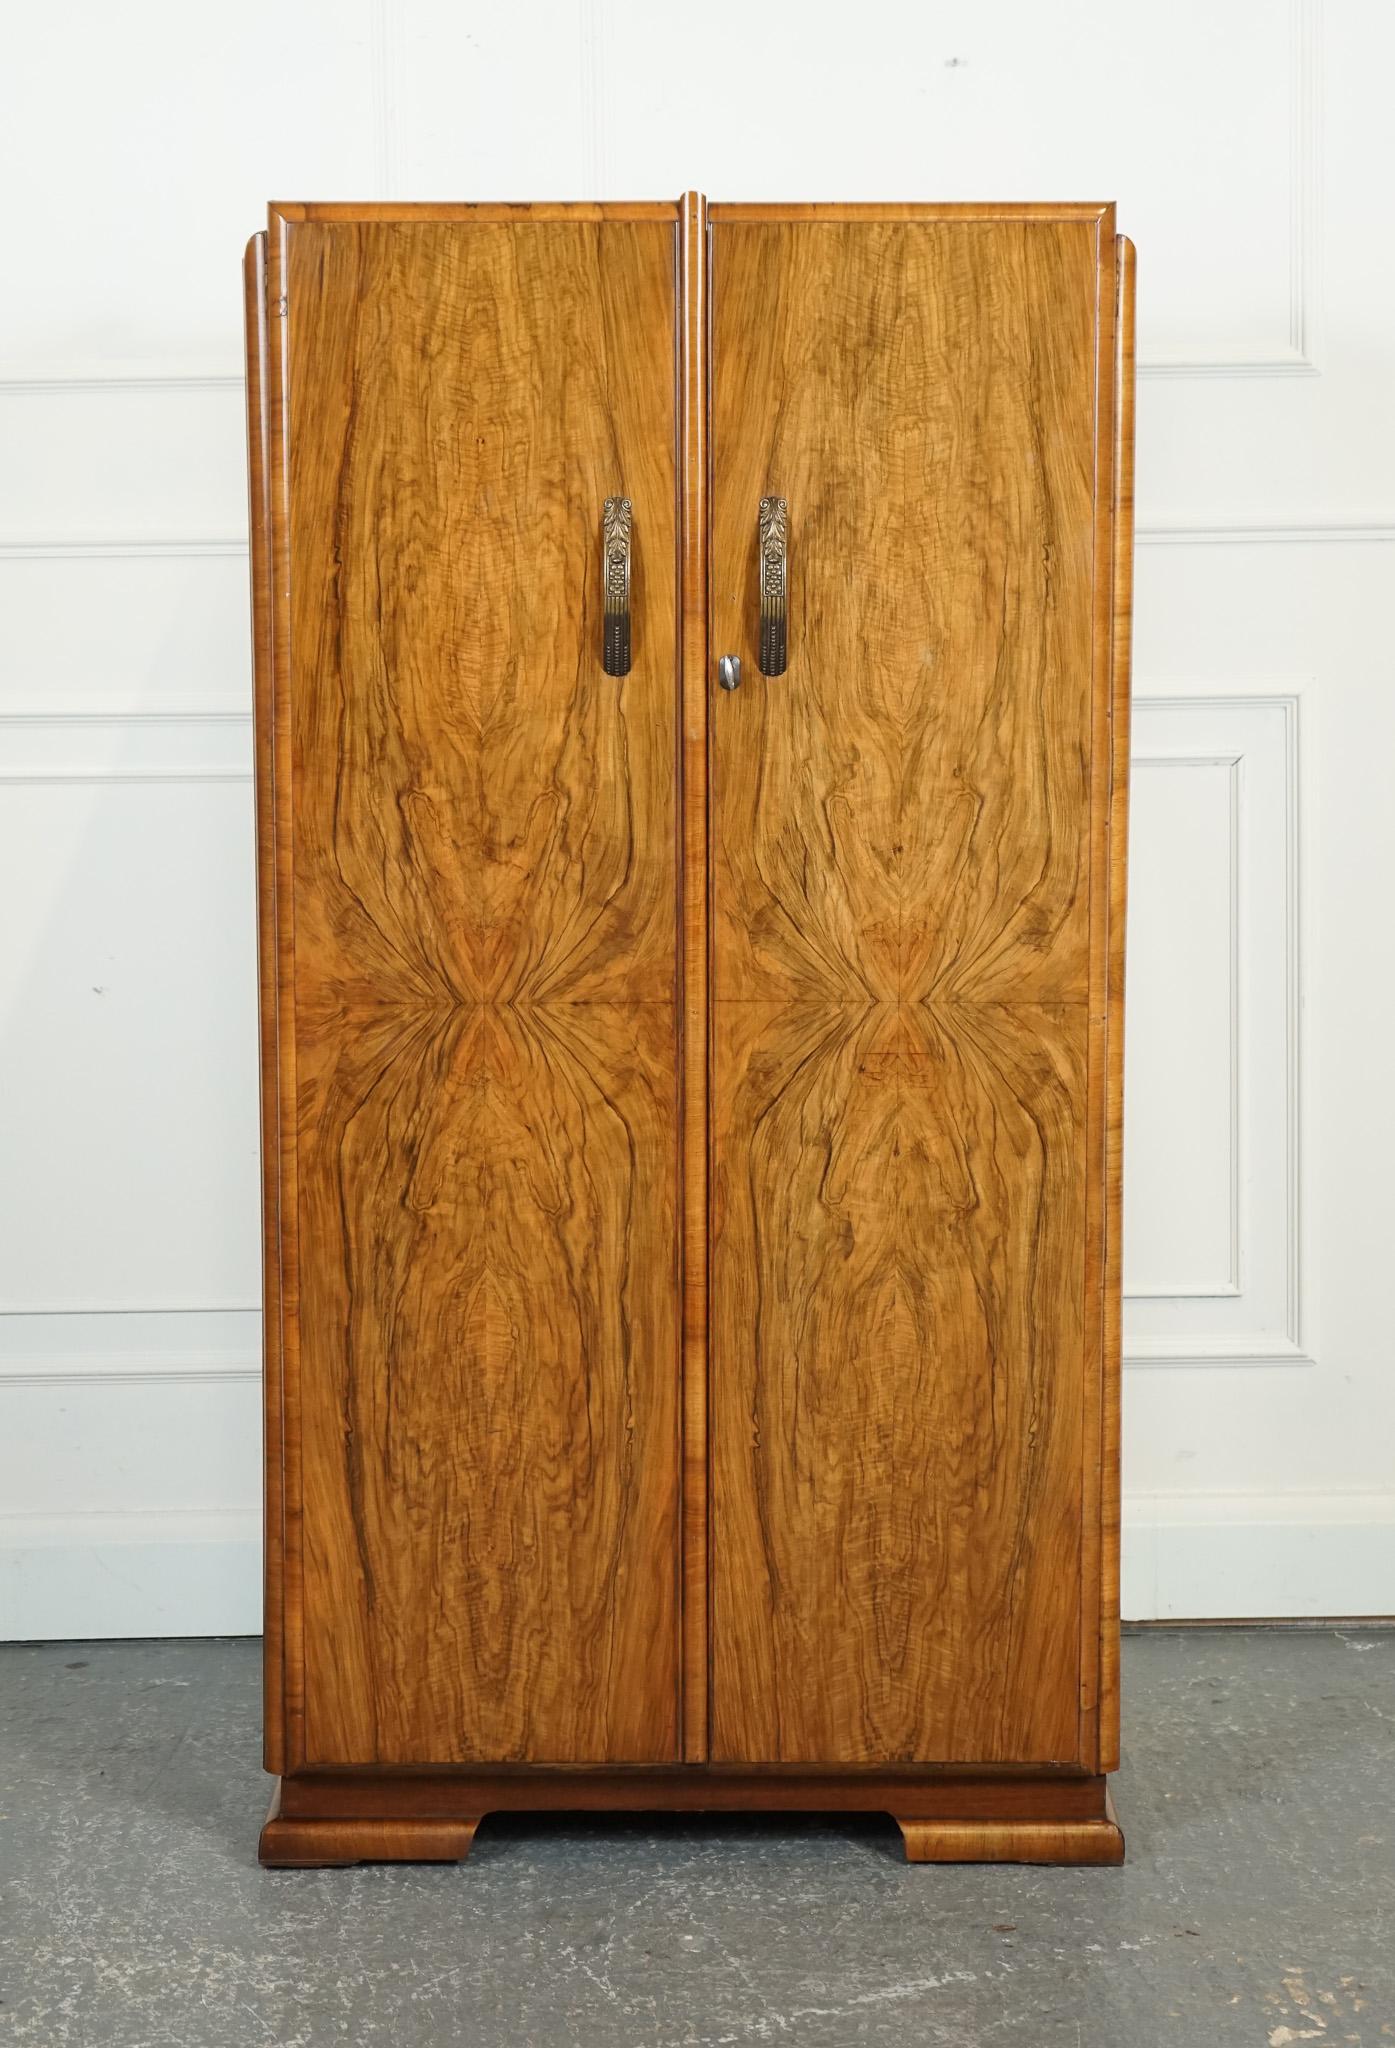 

We are delighted to offer for sale this Burr Walnut Art Deco style small wardrobe is a stylish and elegant piece of furniture that combines the rich beauty of burr walnut wood with the sleek lines and geometric shapes characteristic of the Art